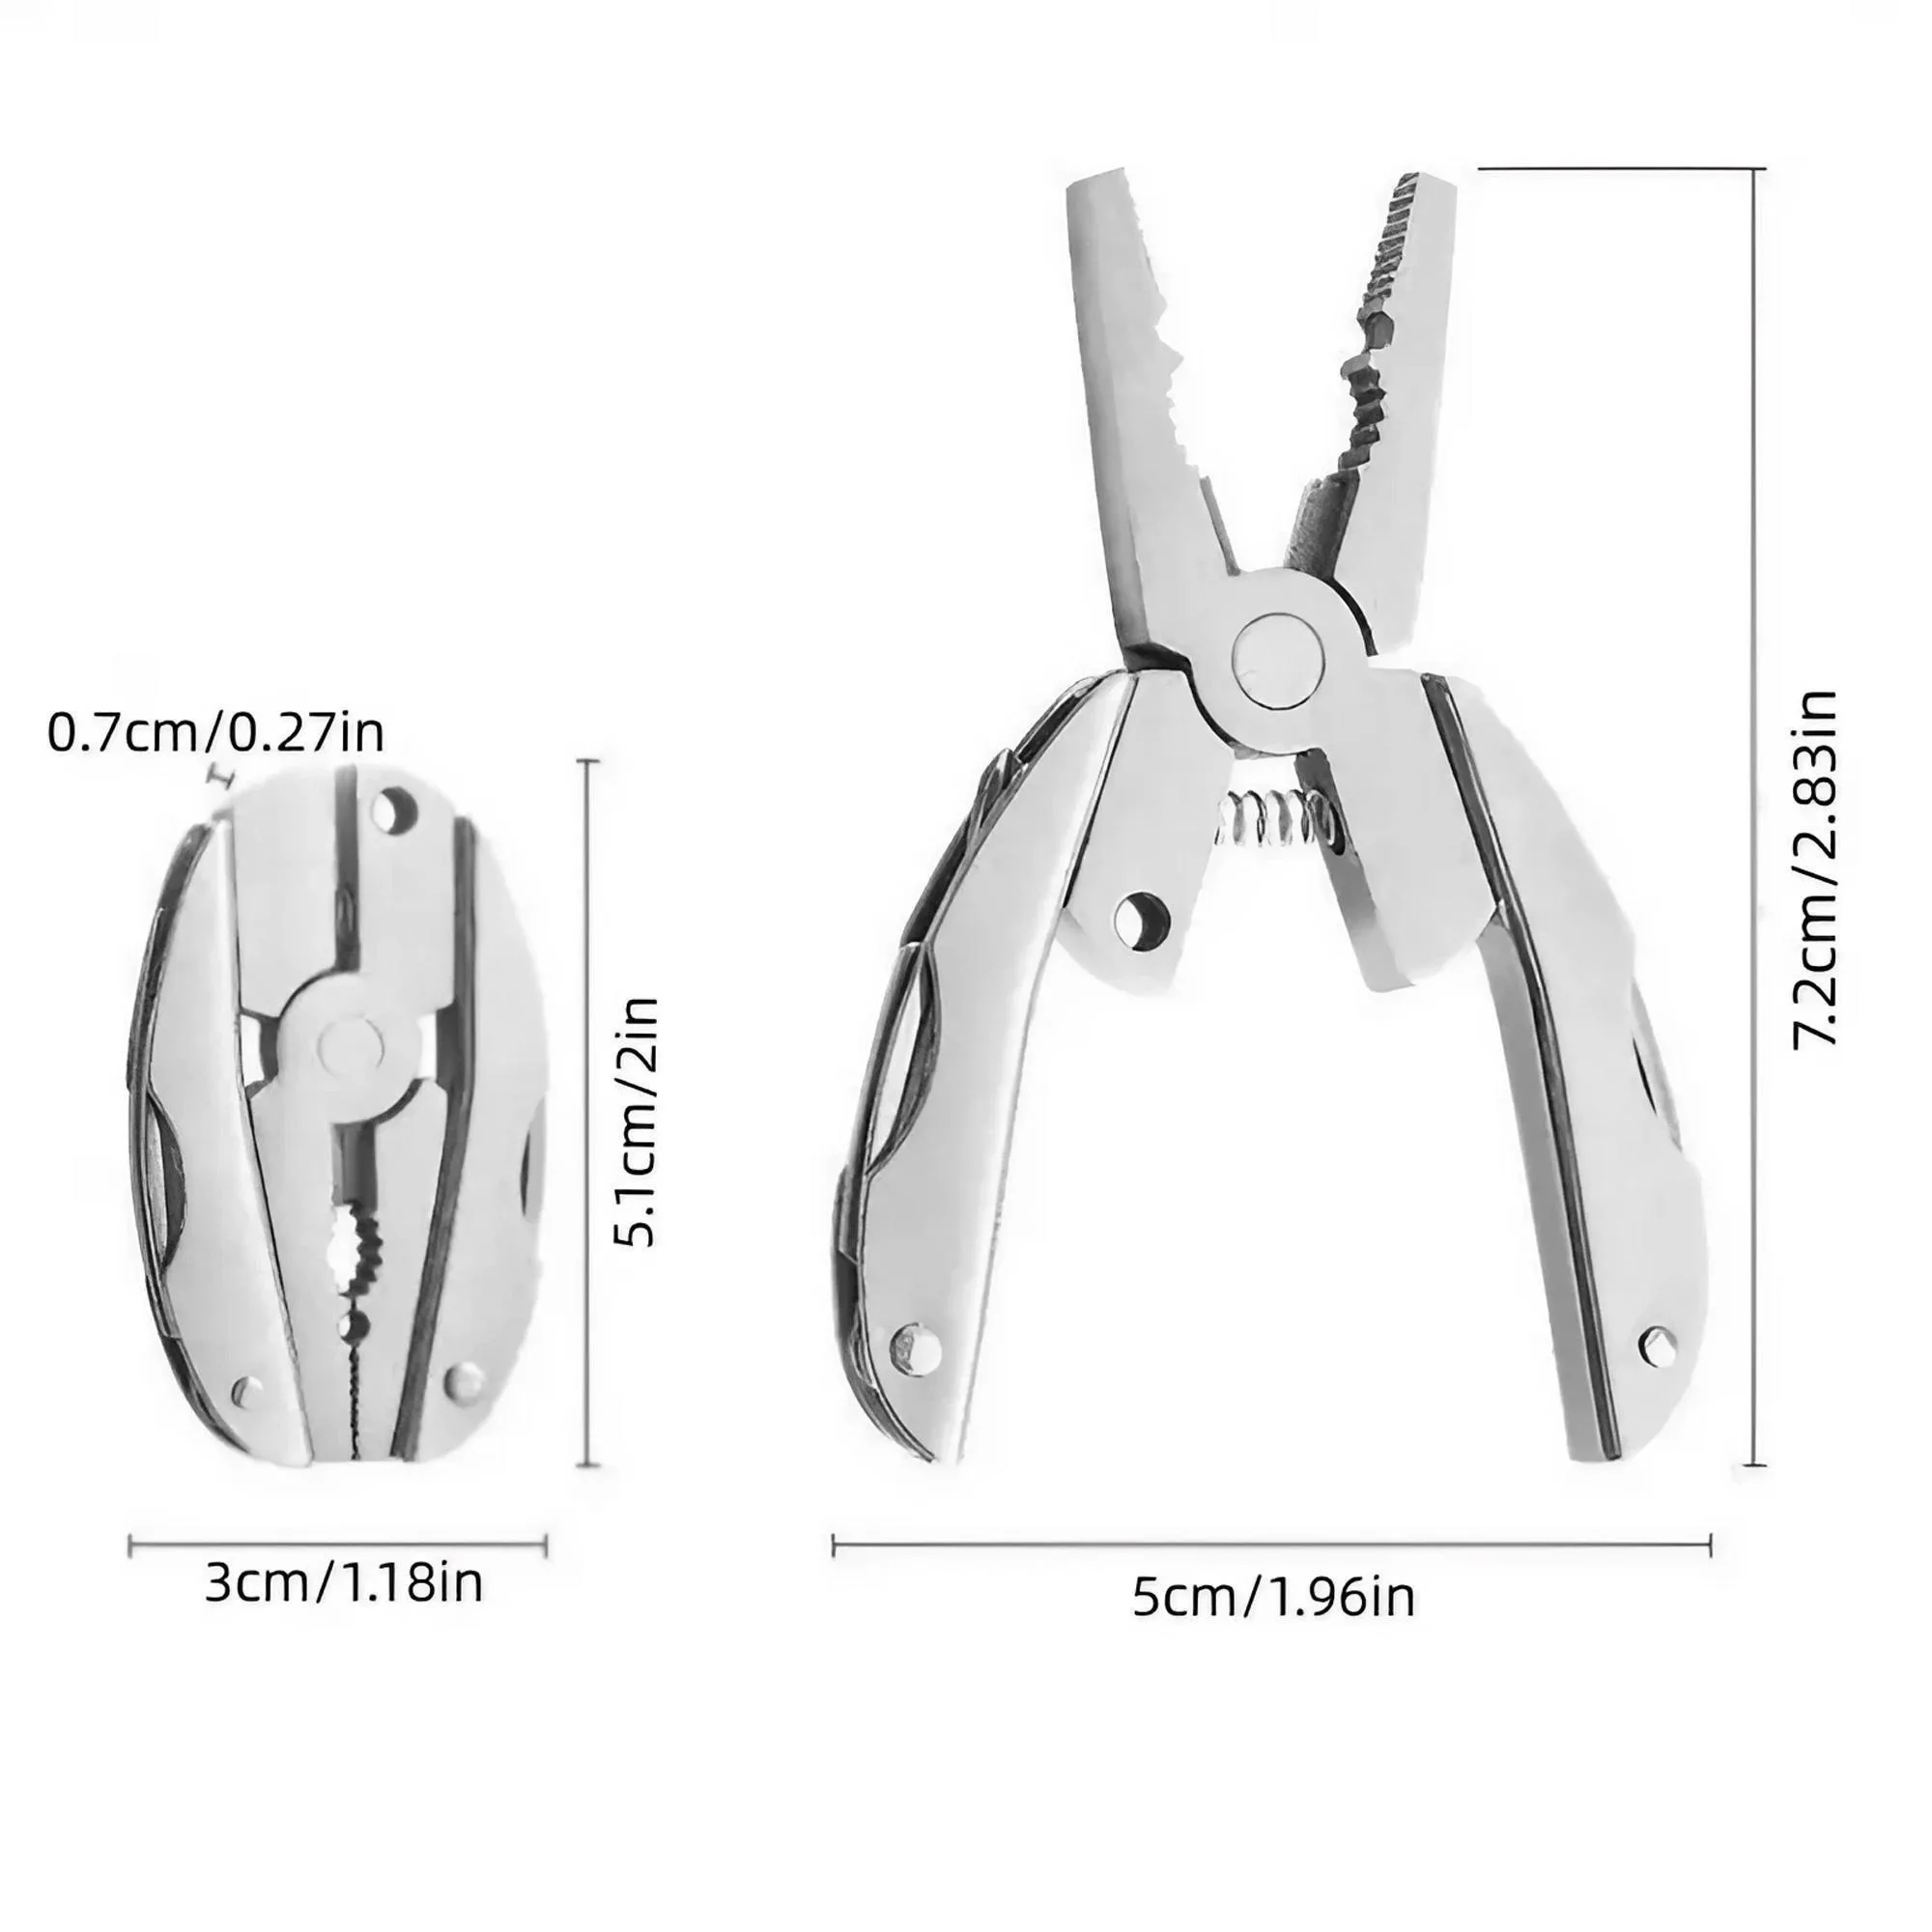 Pocket-Sized Multifunctional Keychain Tool - Mini Pliers with Wire Stripper, Phillips Screwdriver, Knife, File, Flat Screwdriver